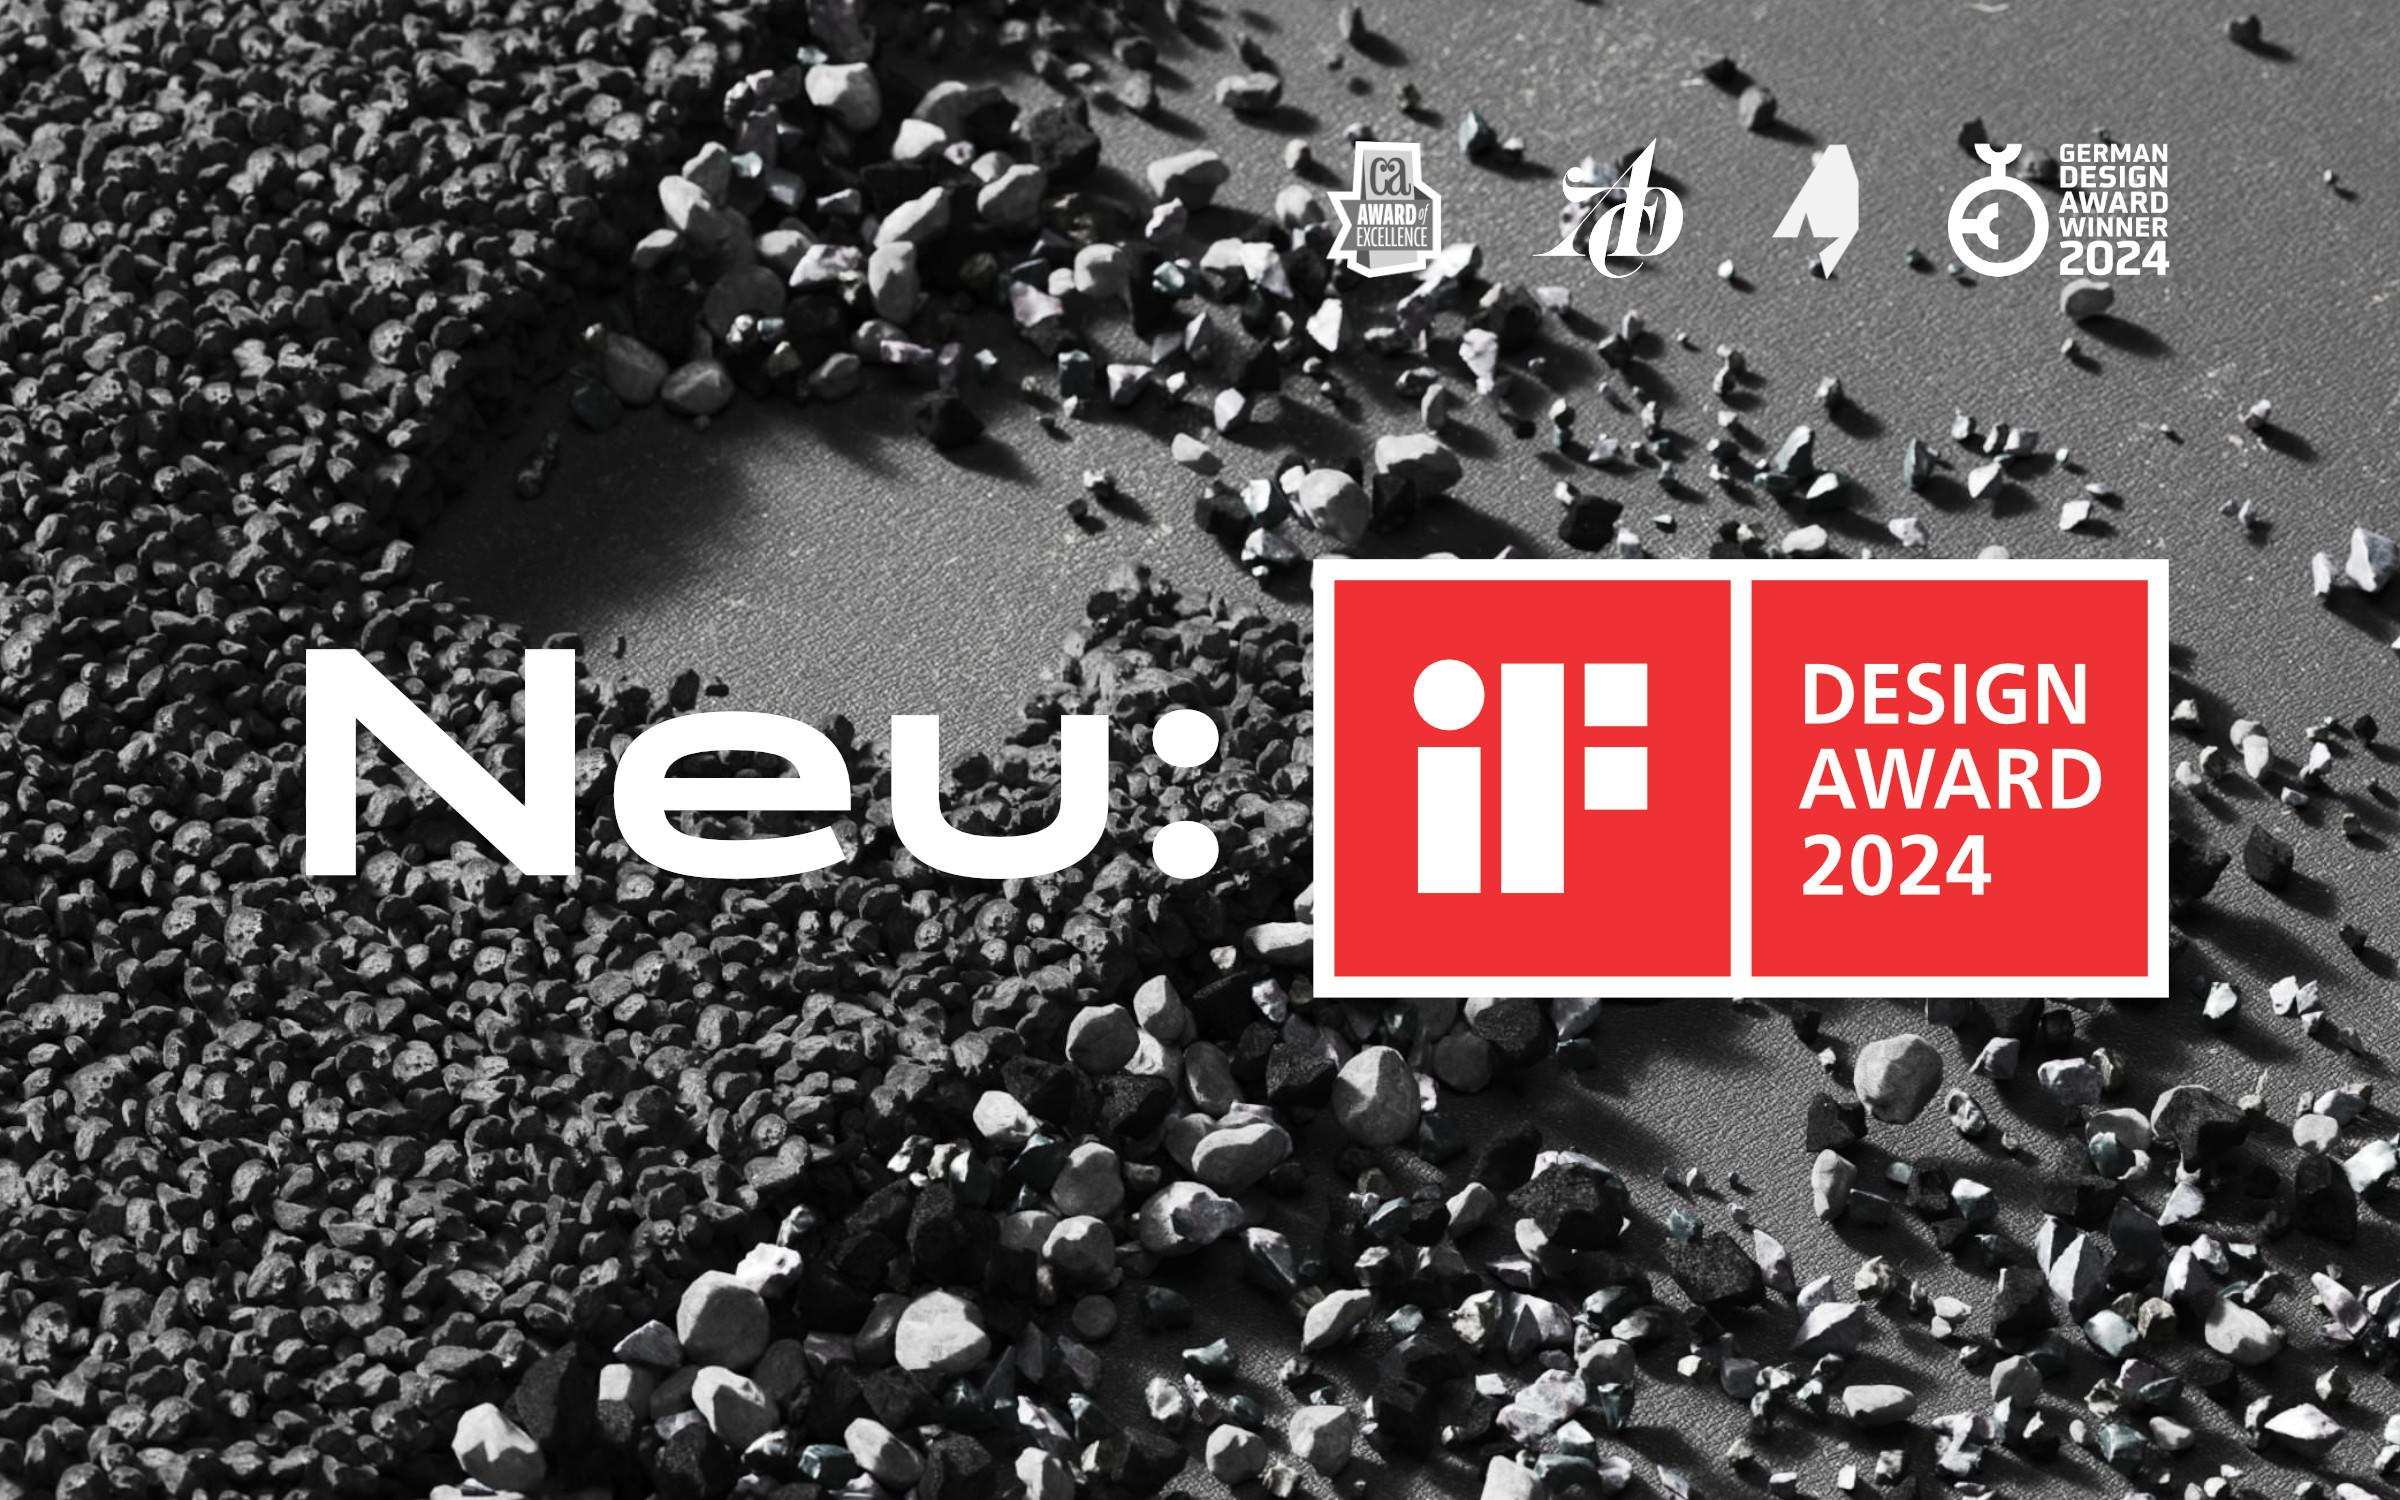 Neue DIN has just won the iF DESIGN AWARD 2024 in the category Communication → Typography/Signage